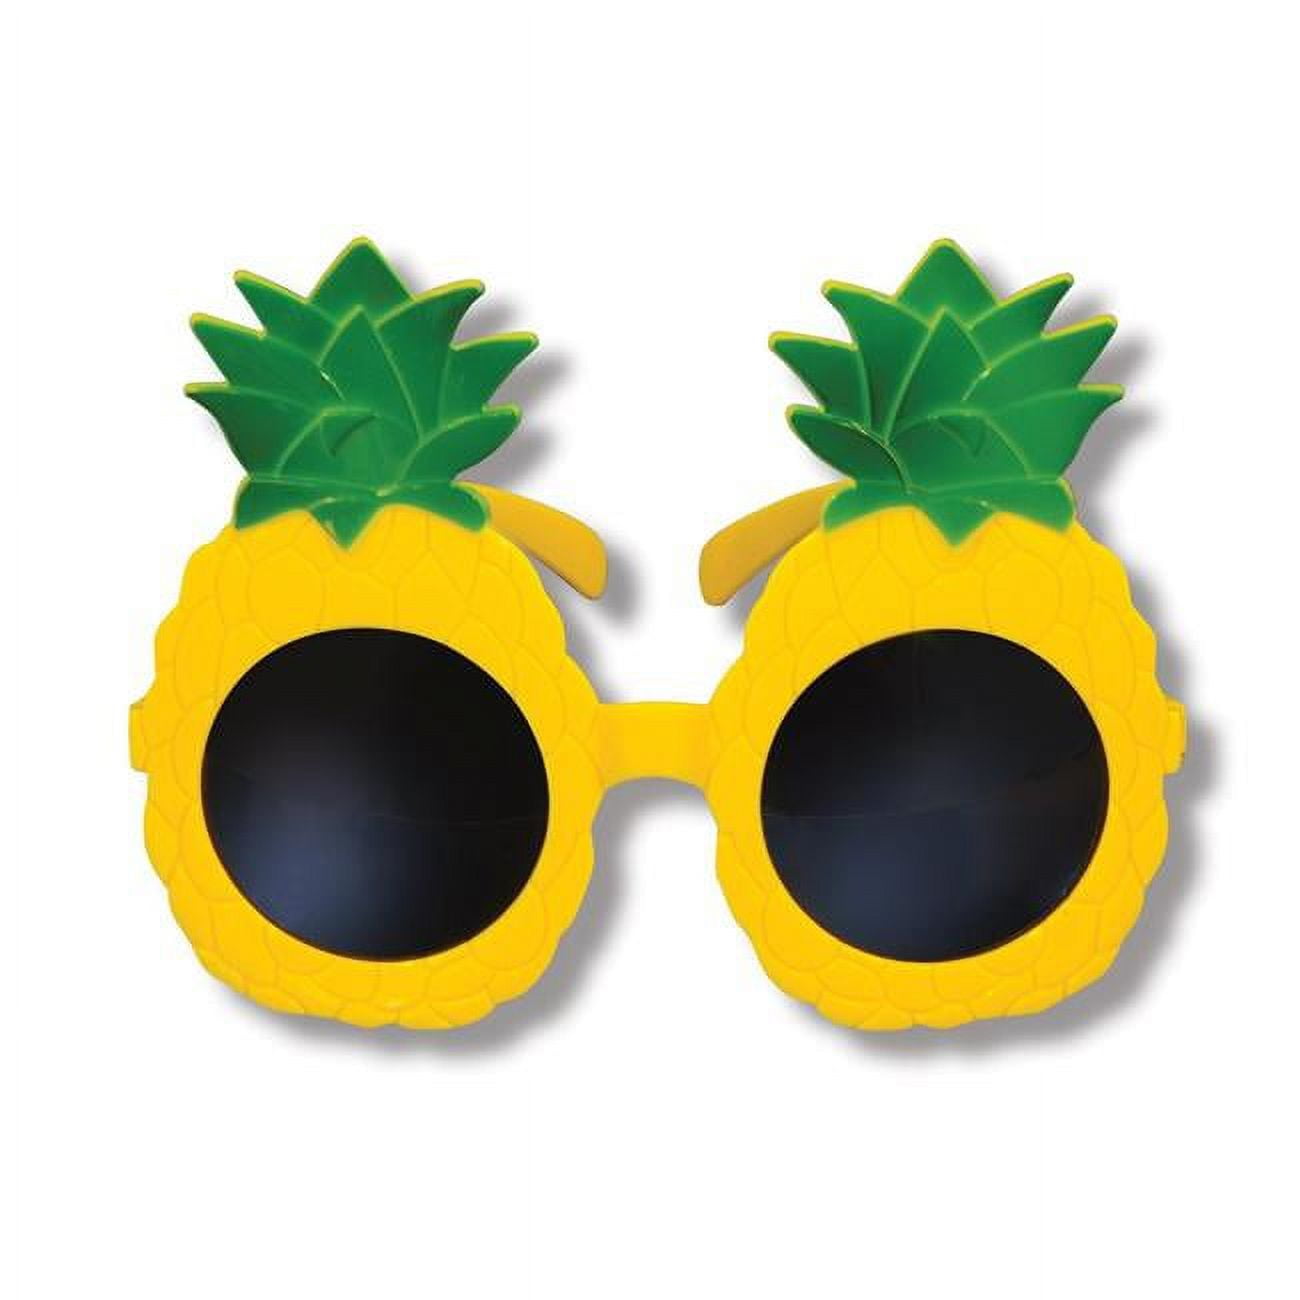 Picture of Beistle 60670 Pineapple Glasses - Pack of 6 - One Size Fits All